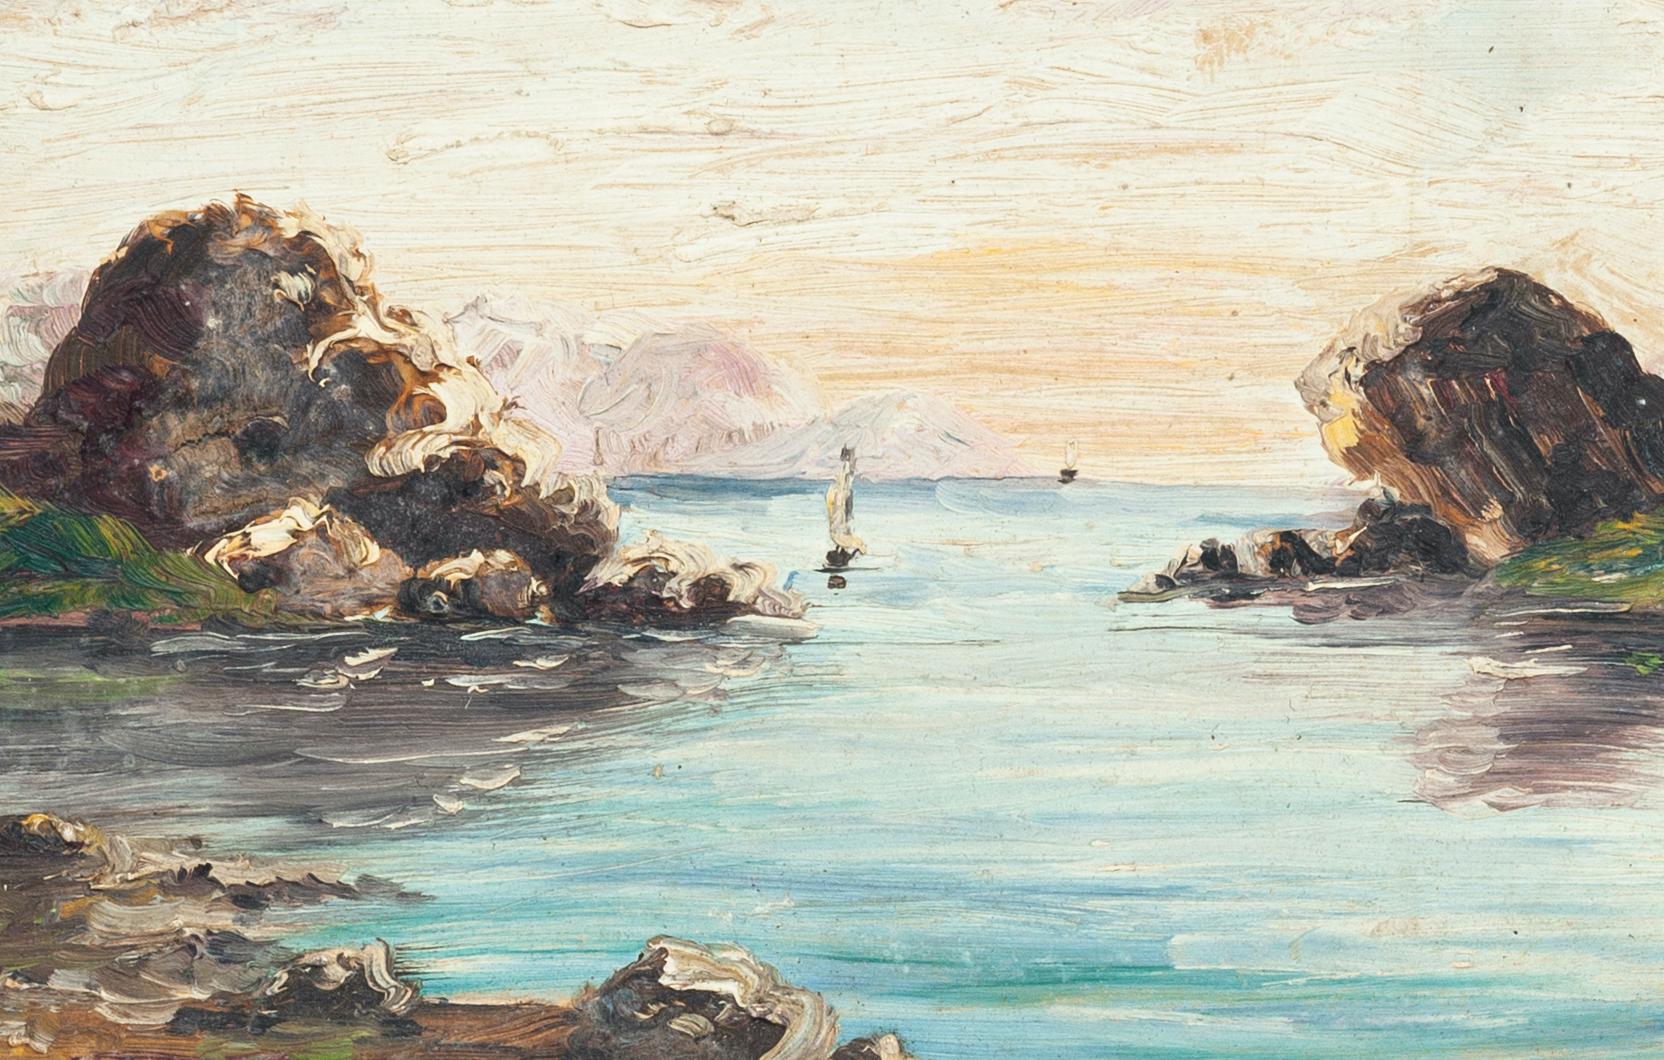 Marine Landscape - Oil on Carboard - 19th Century - Painting by Unknown